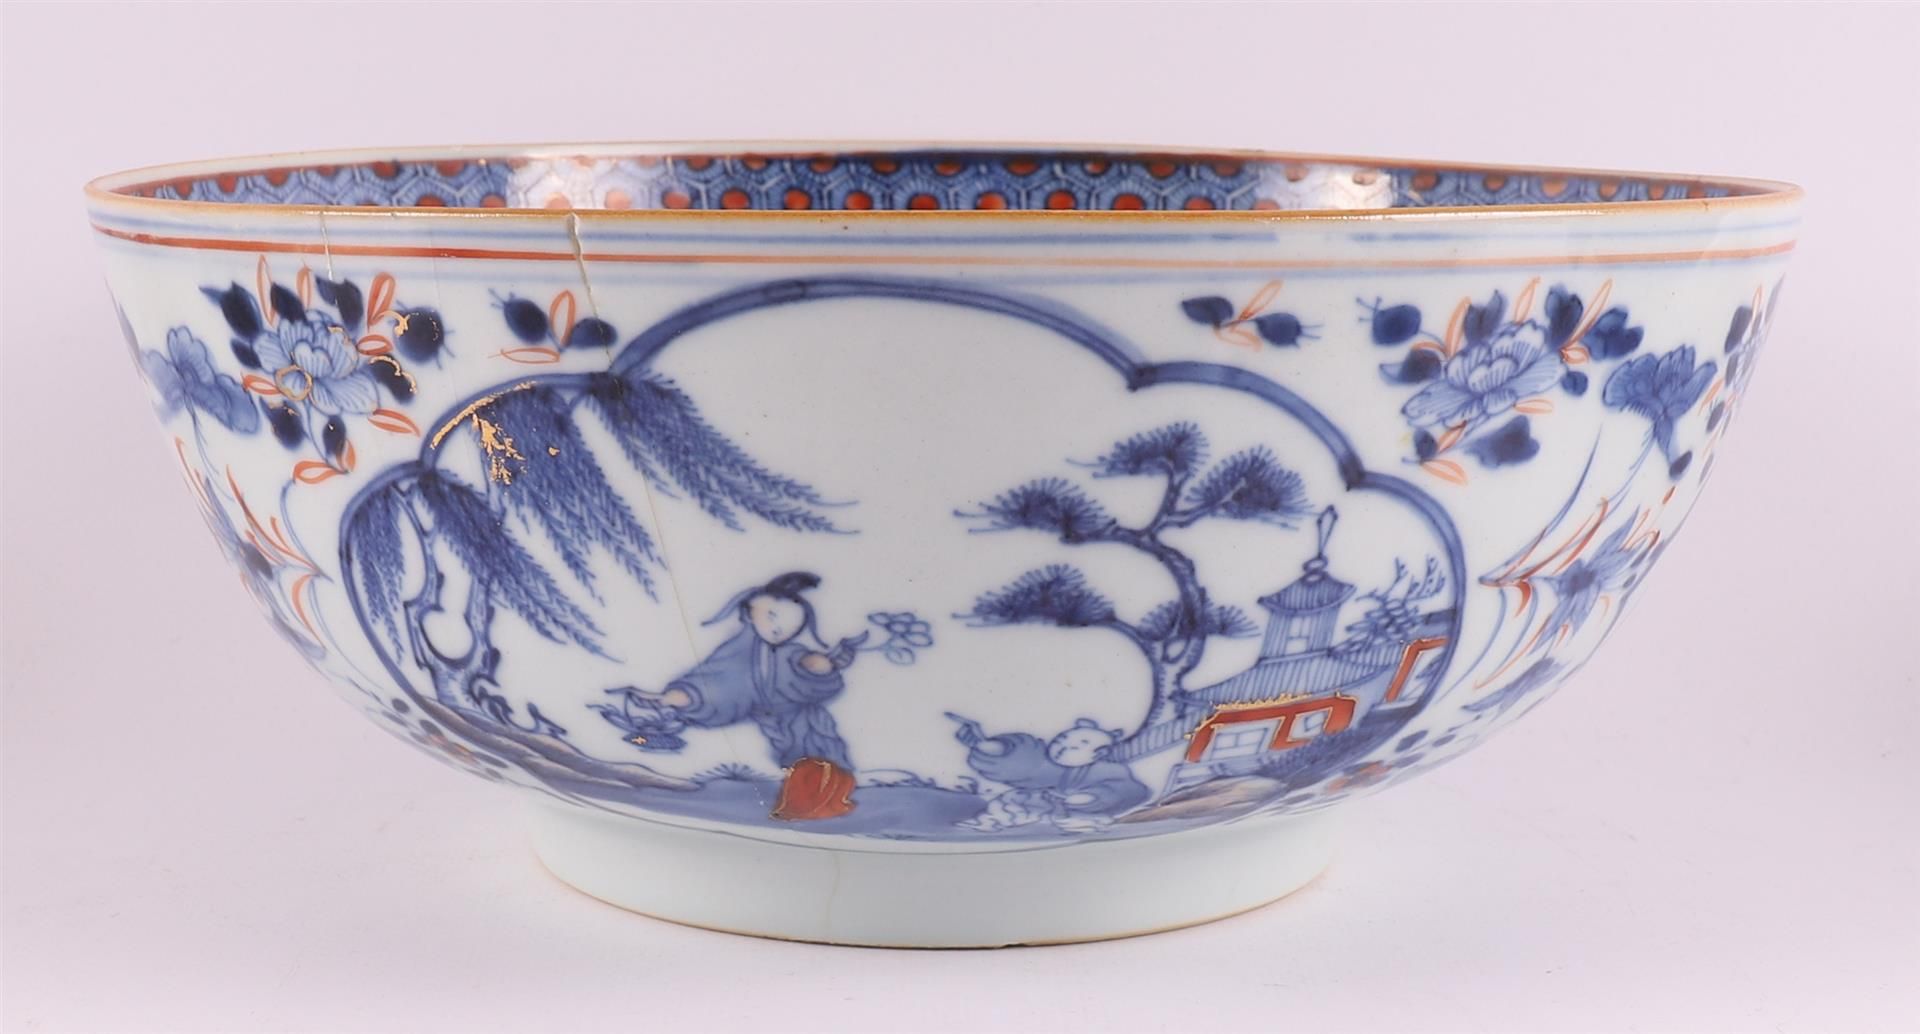 A lot of various Chinese porcelain bowls, China, 18th century - Image 2 of 25